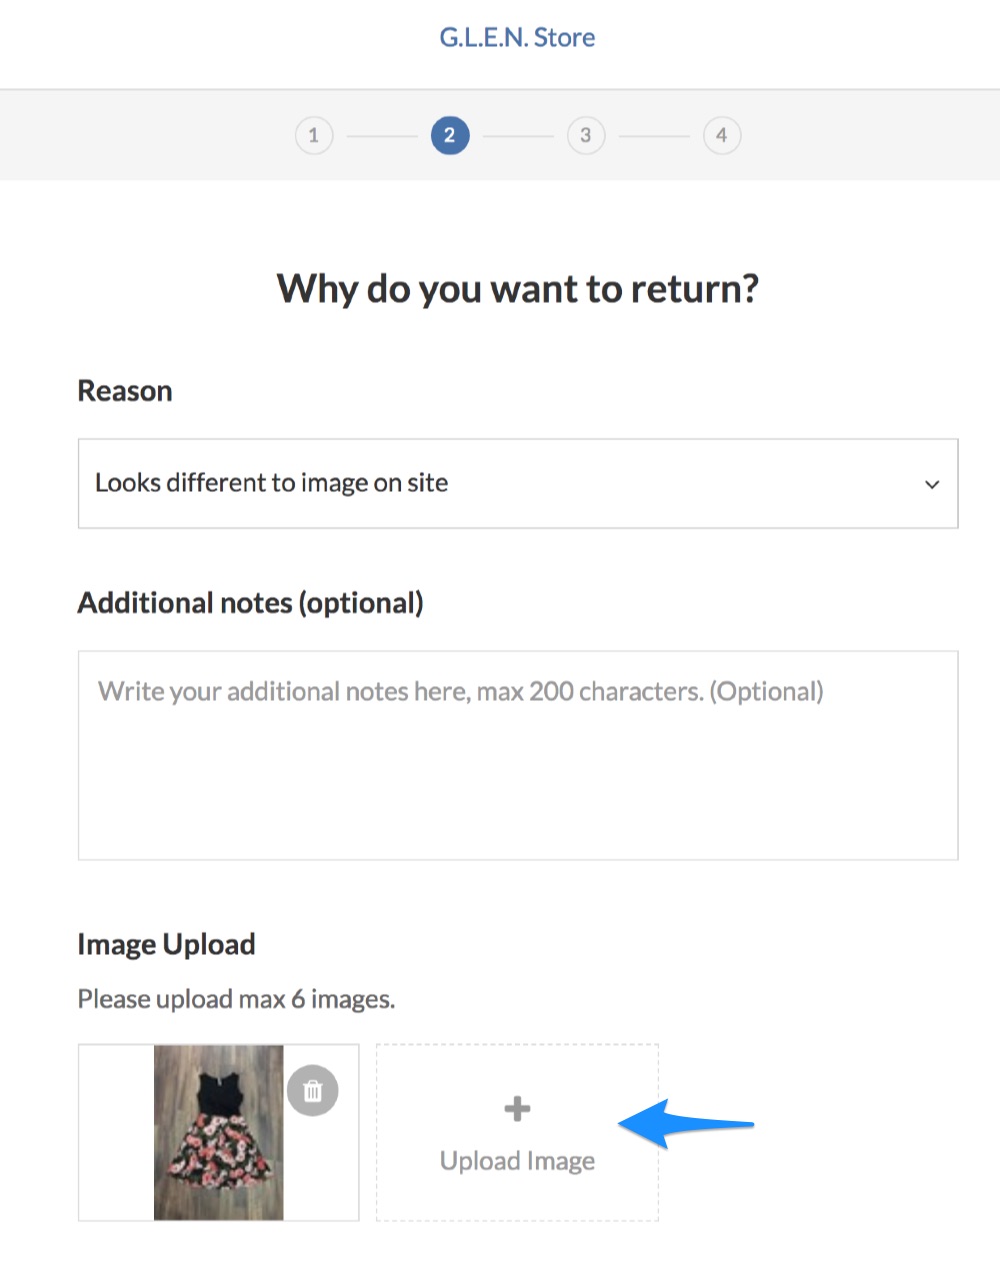 Approve RMA with images in Returns Center